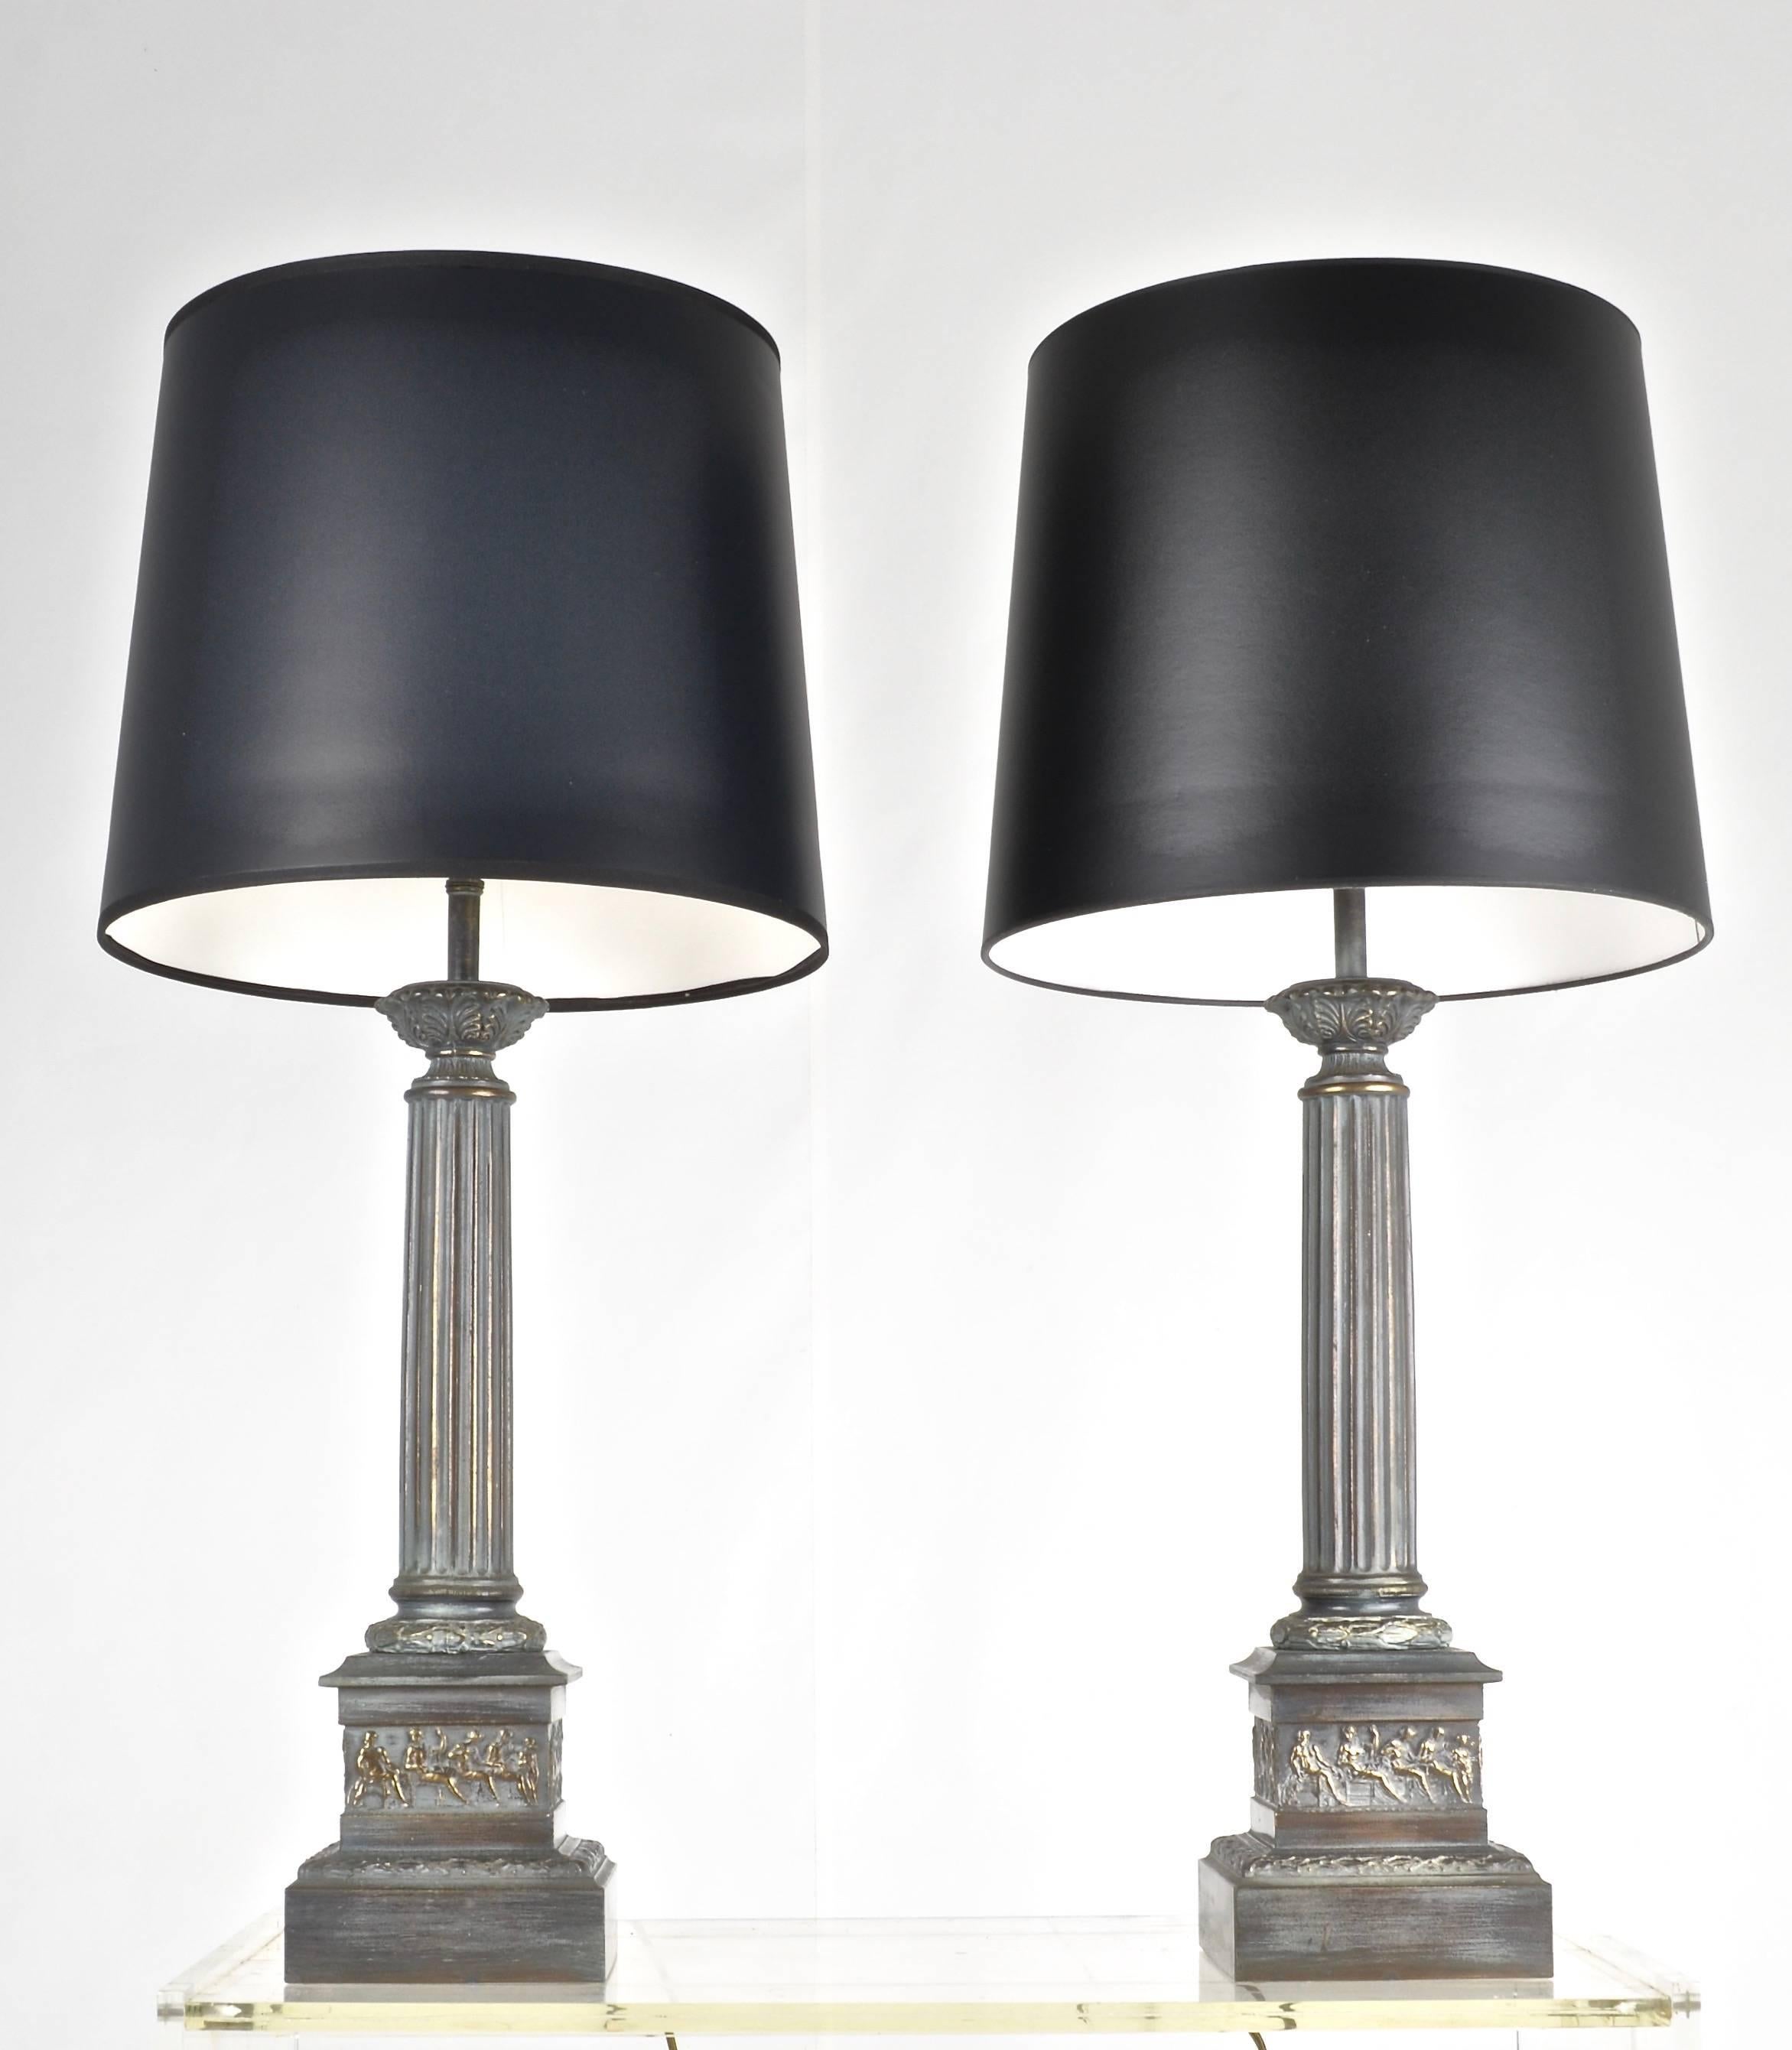 A handsome pair of metal lamps, featuring a neoclassical motif in a verdigris bronze finish. All new wiring and three-way sockets in bronze tone. New shades opaque black paper. Height to the top of the socket is 24.5 inches; to the top of the finial